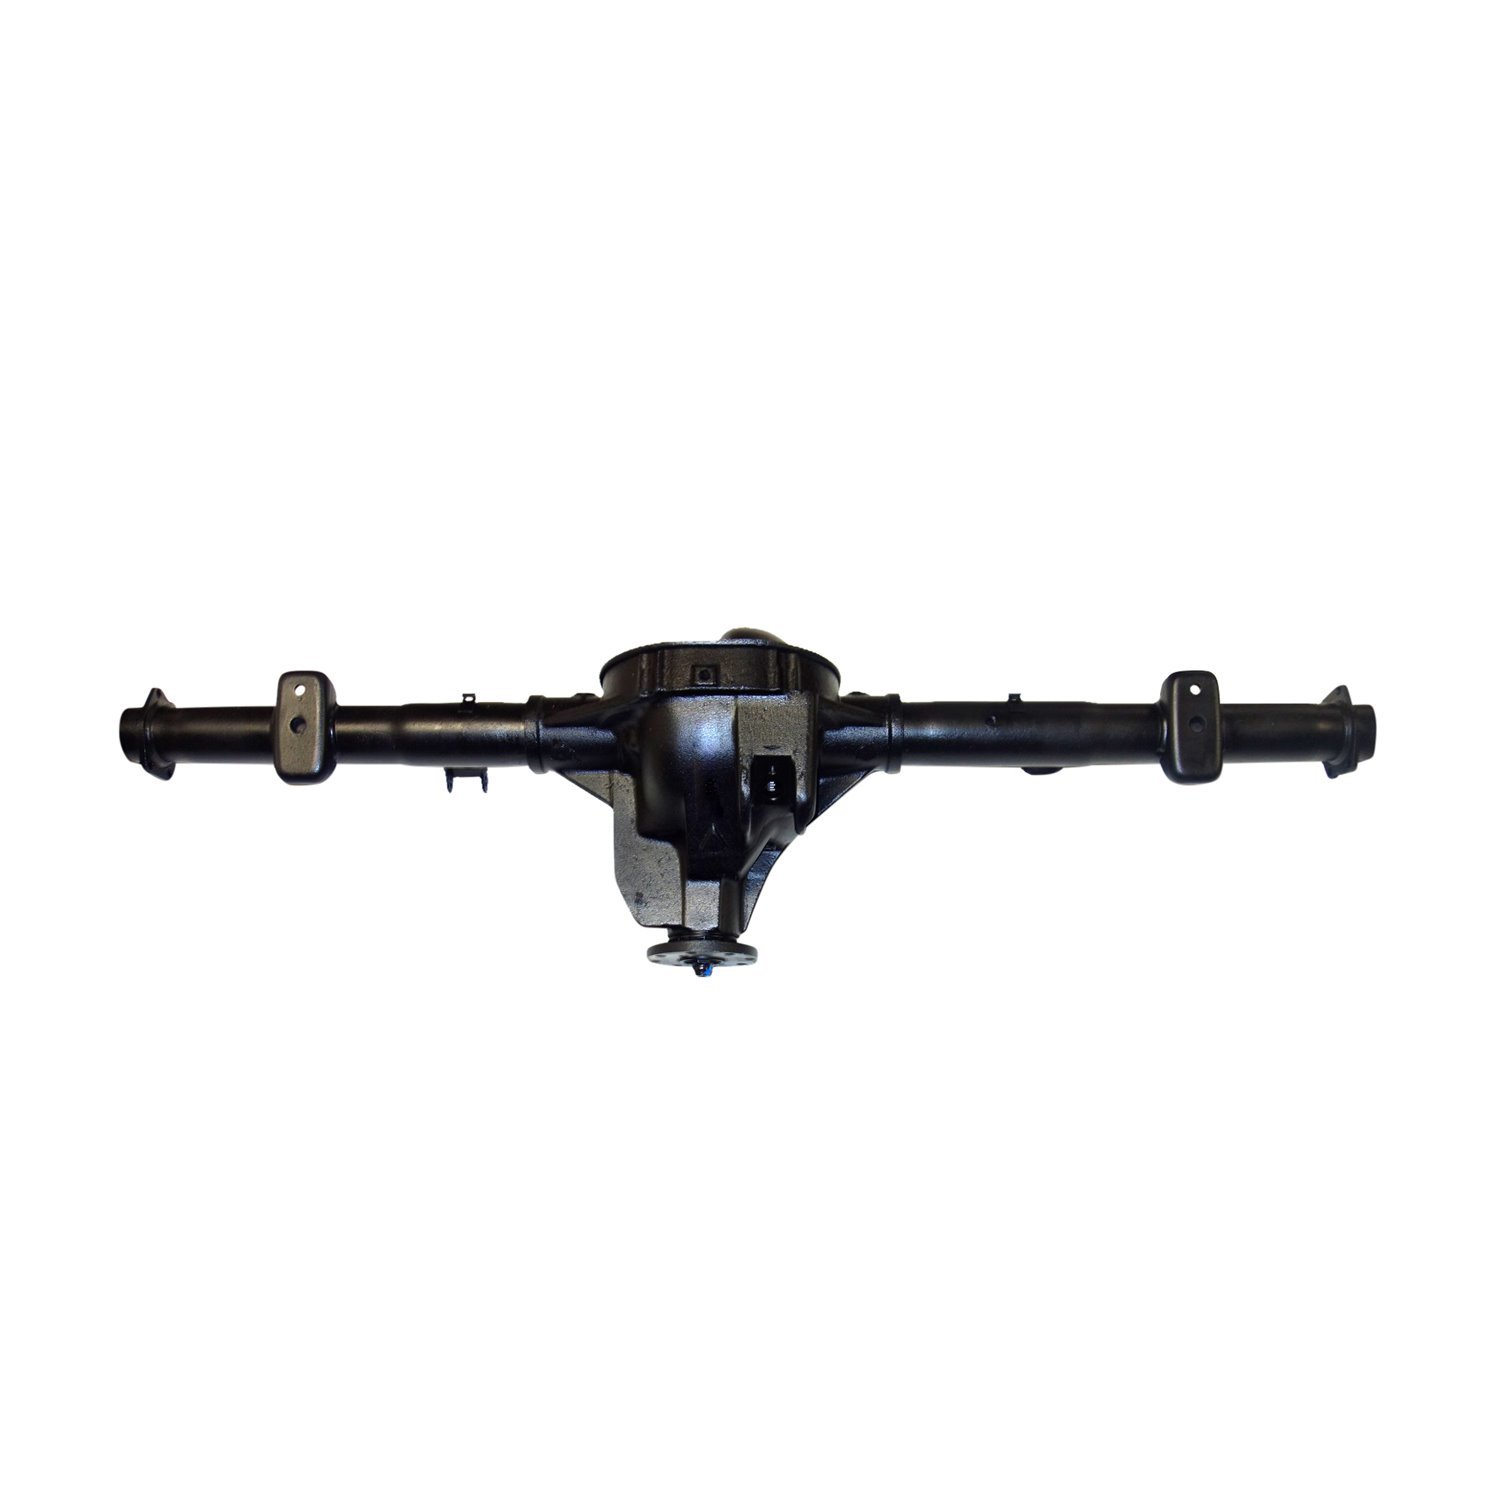 Remanufactured Complete Axle Assembly for Ford 8.8" 10-11 Ford Ranger 3.55 , Disc Brakes